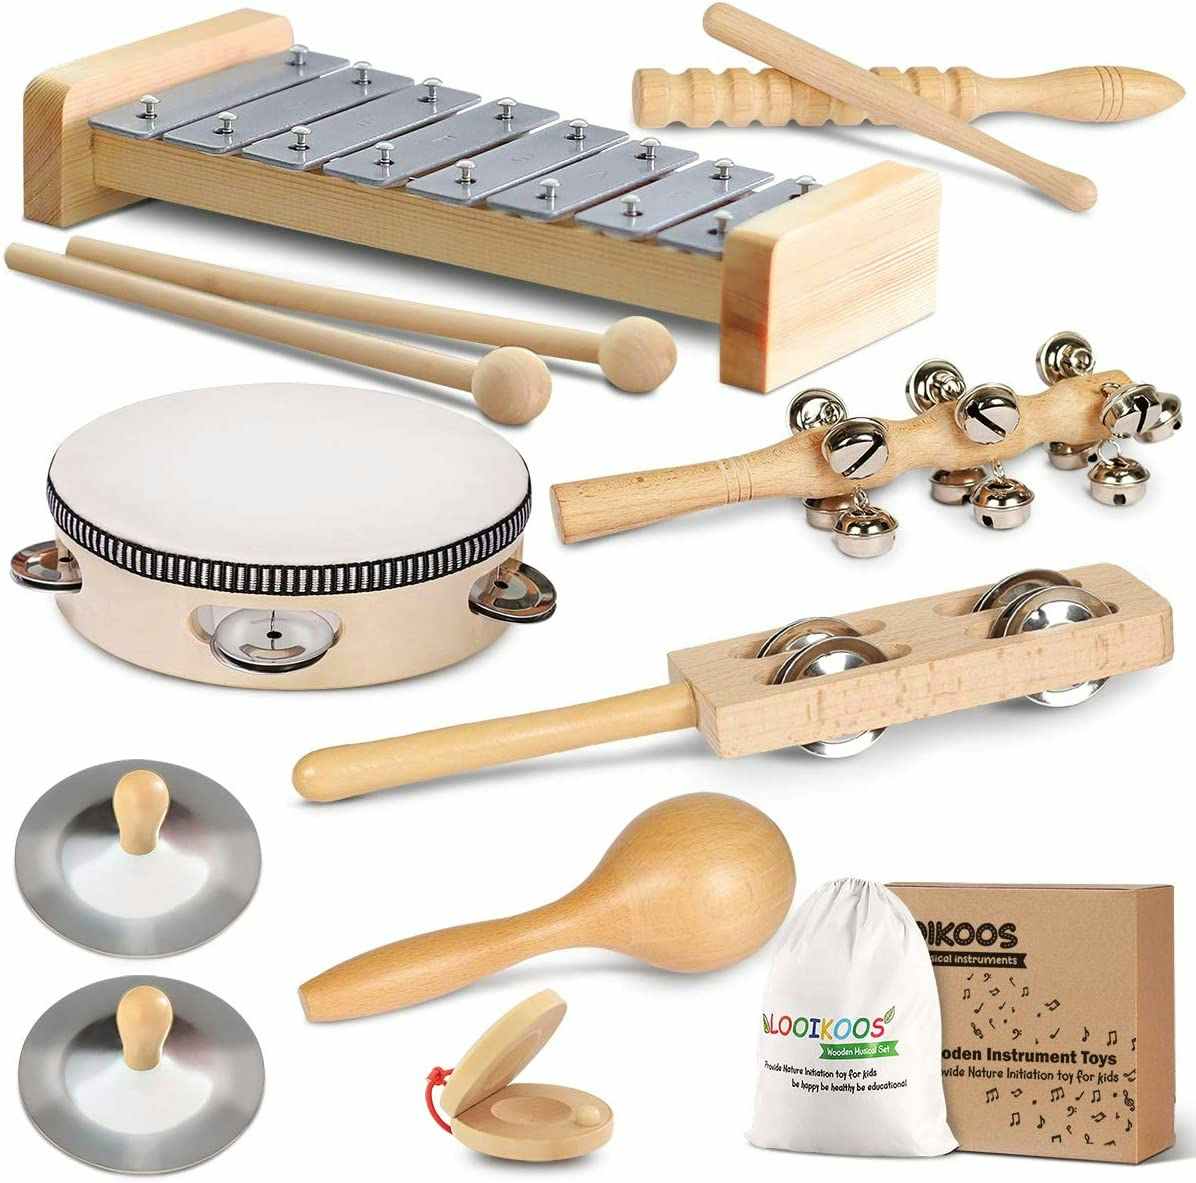 A Looikoos Musical Instrument Set with a tambourine, xylophone, and other small instruments on a white background.